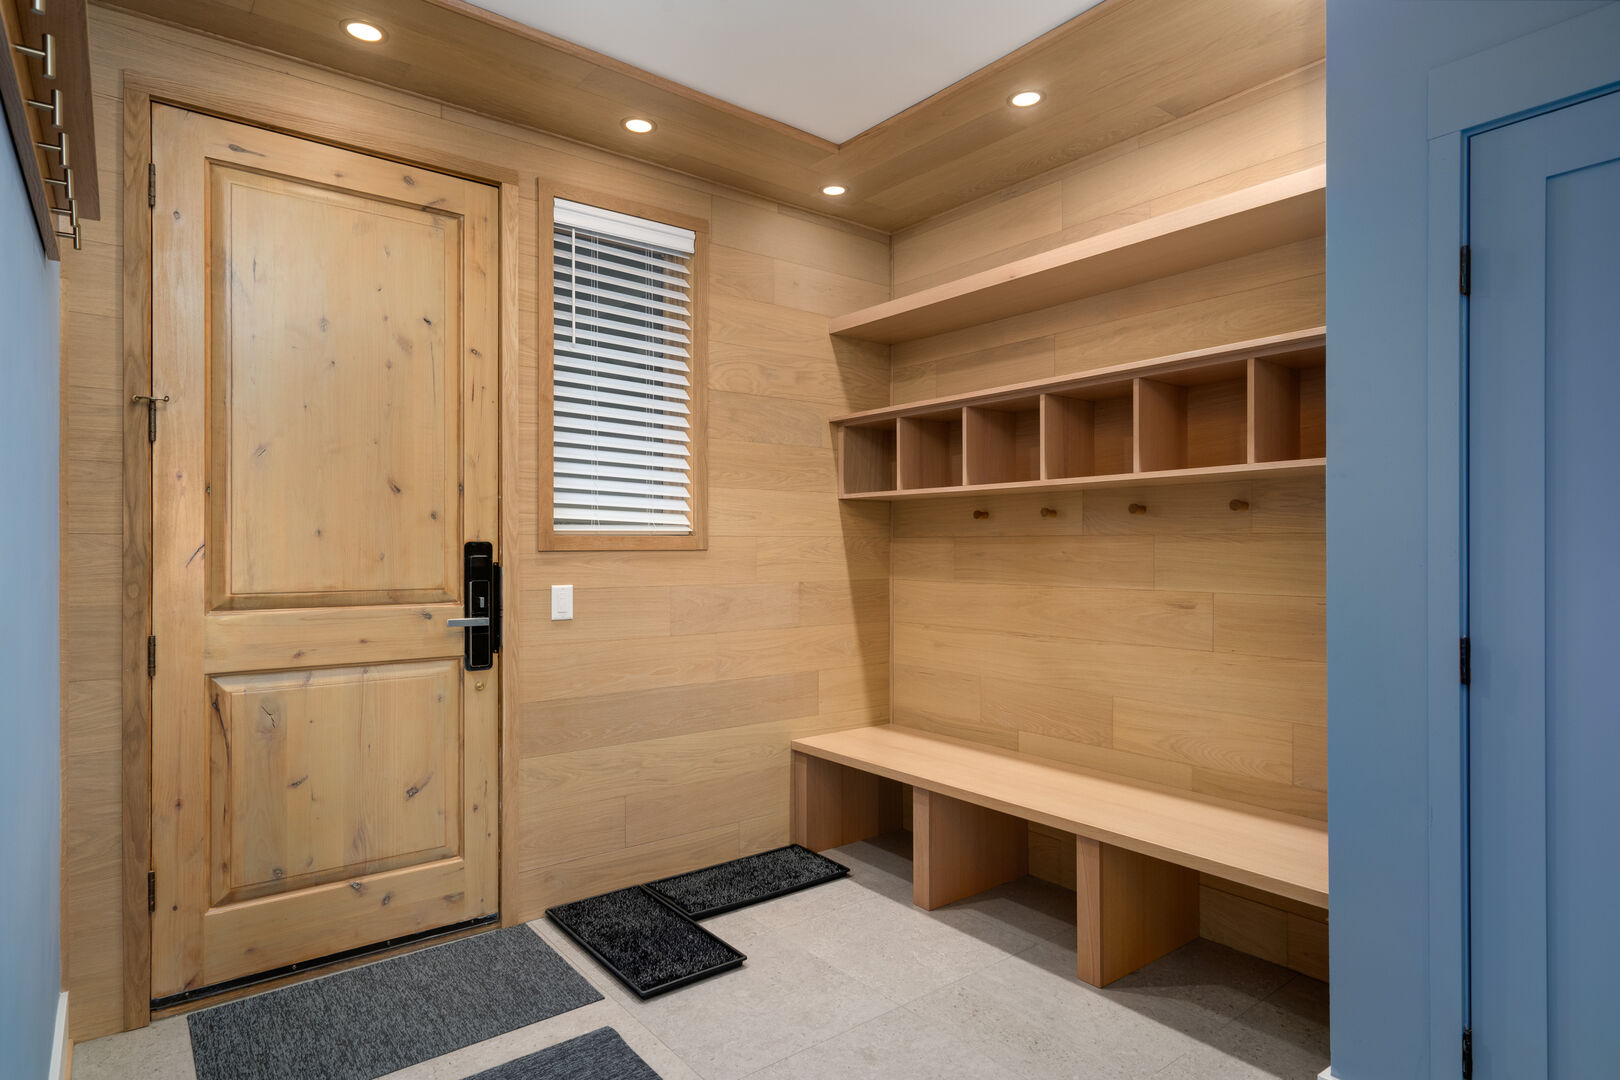 The entry mudroom, cubbies, coat racks and closet have more than enough storage.